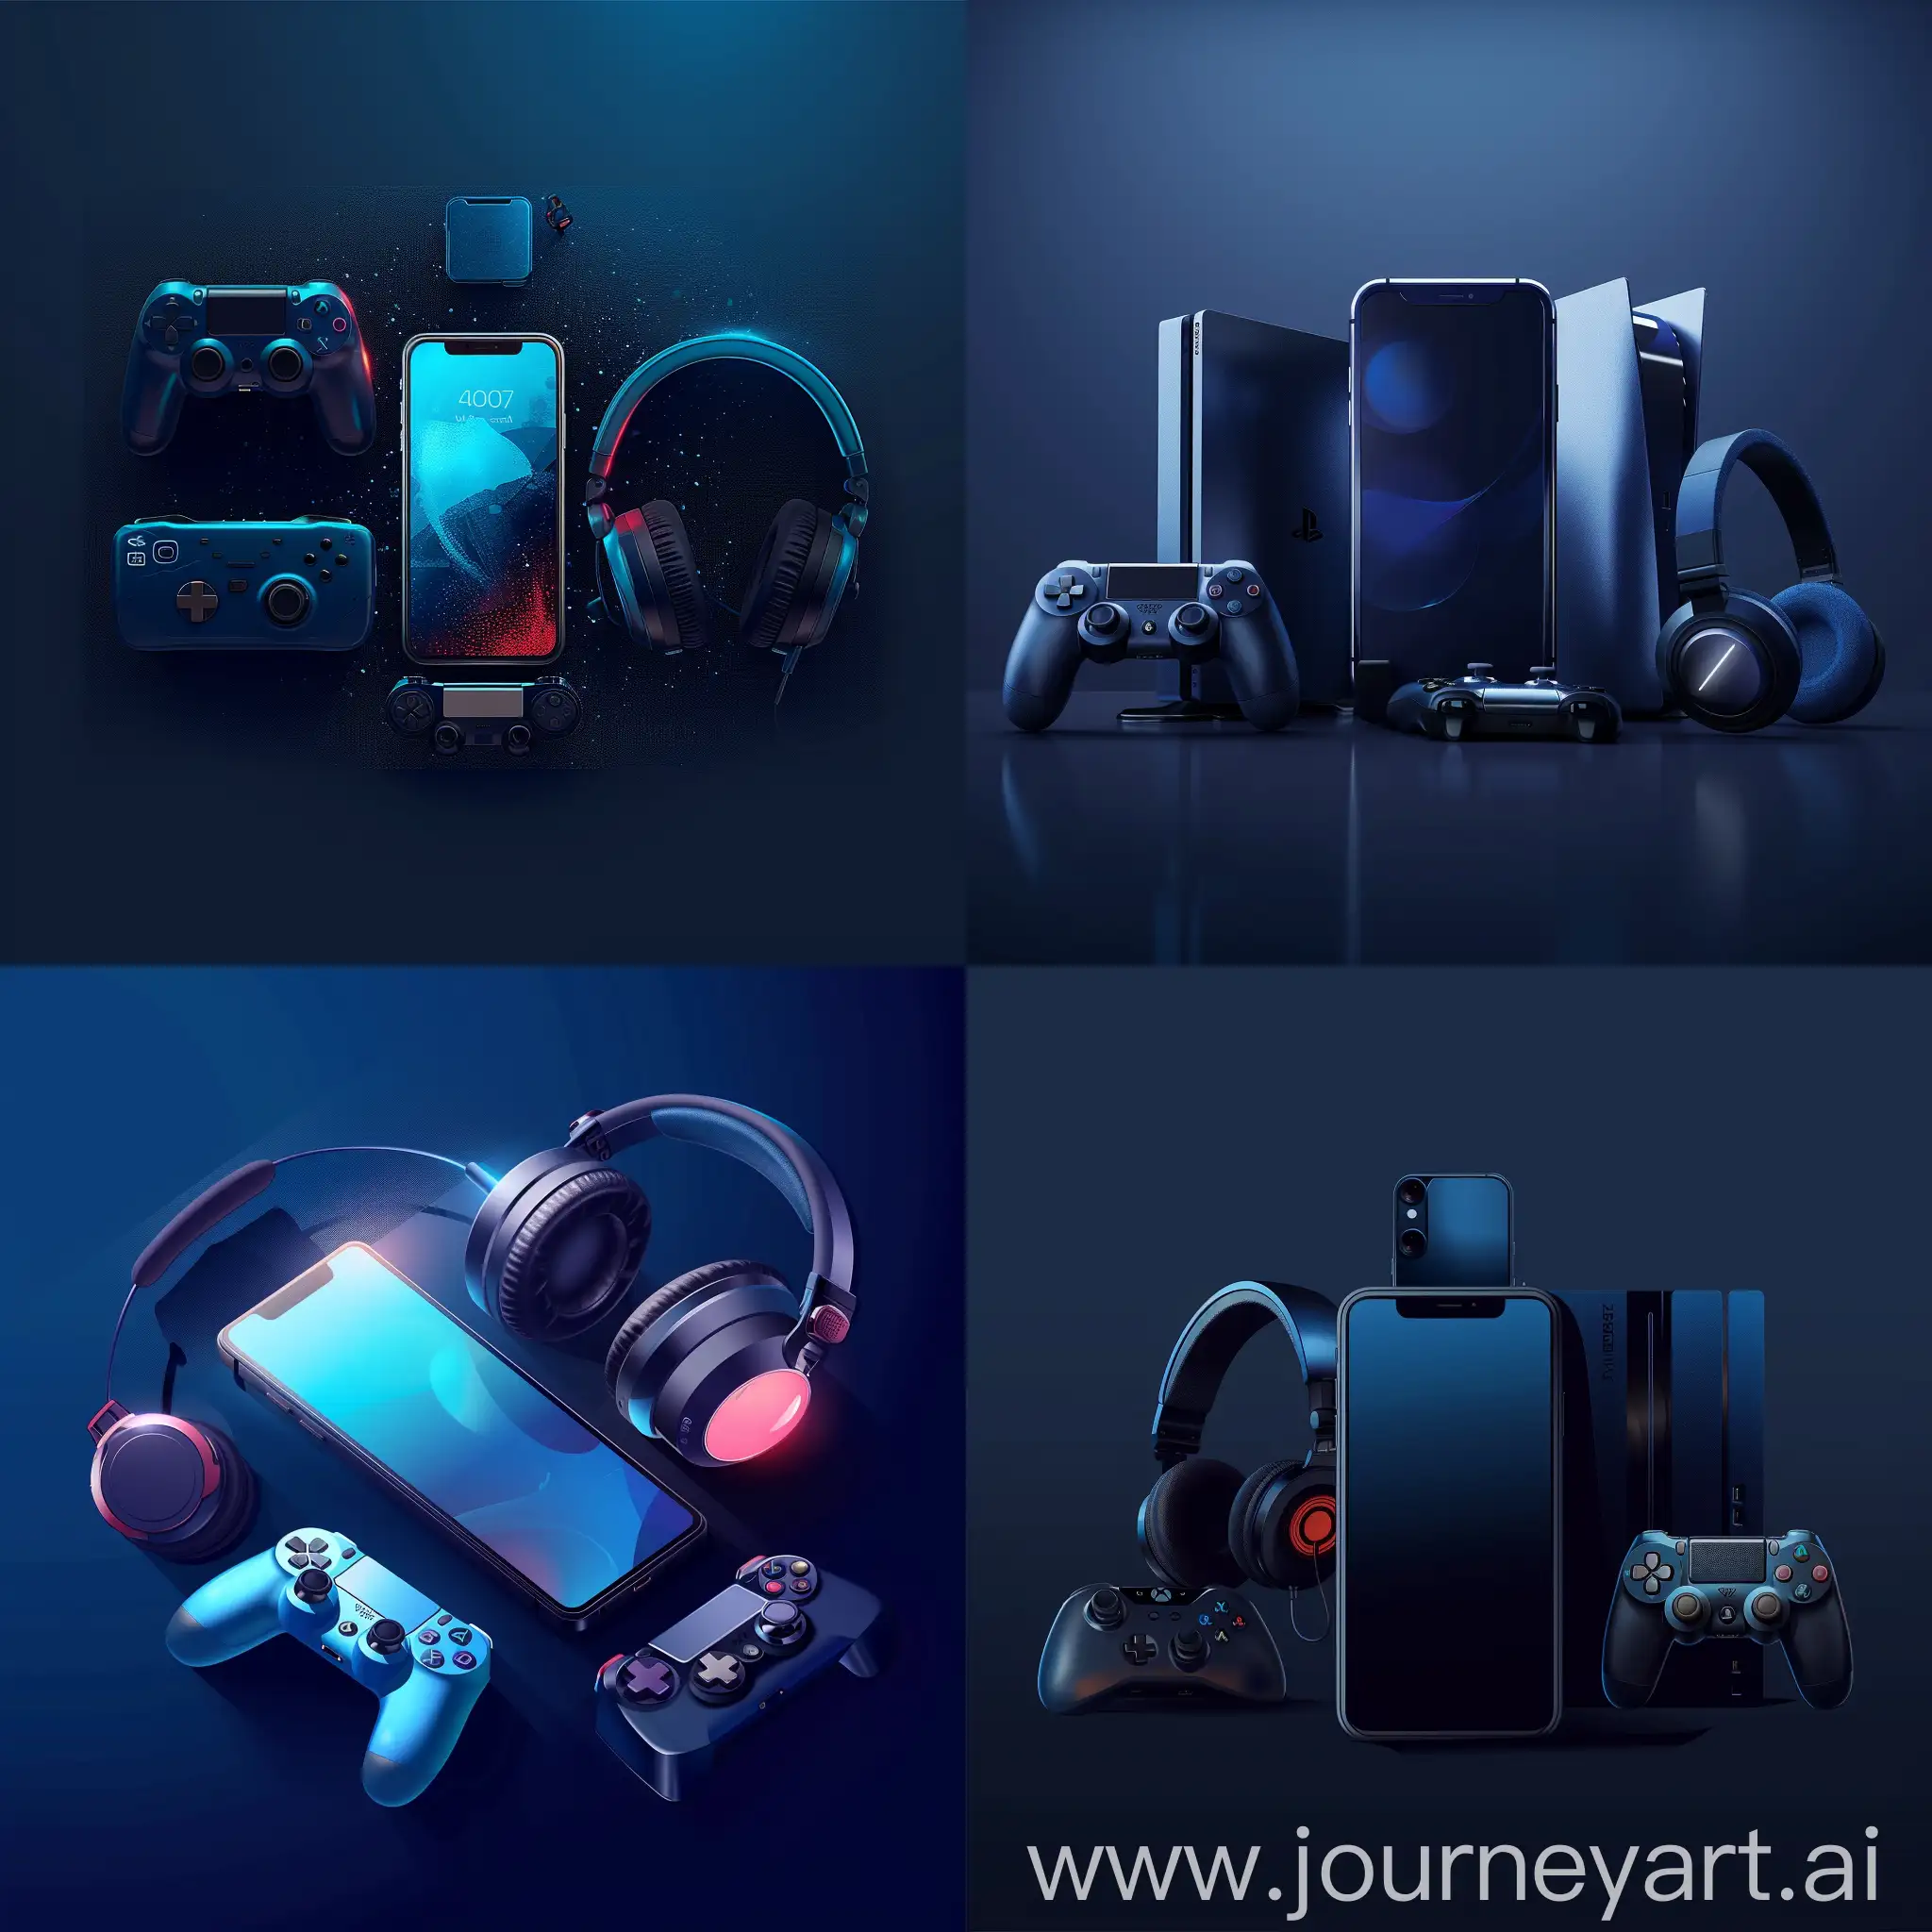 Tech-Gadgets-on-Dark-Blue-Background-Mobile-Phone-Gaming-Console-Headphones